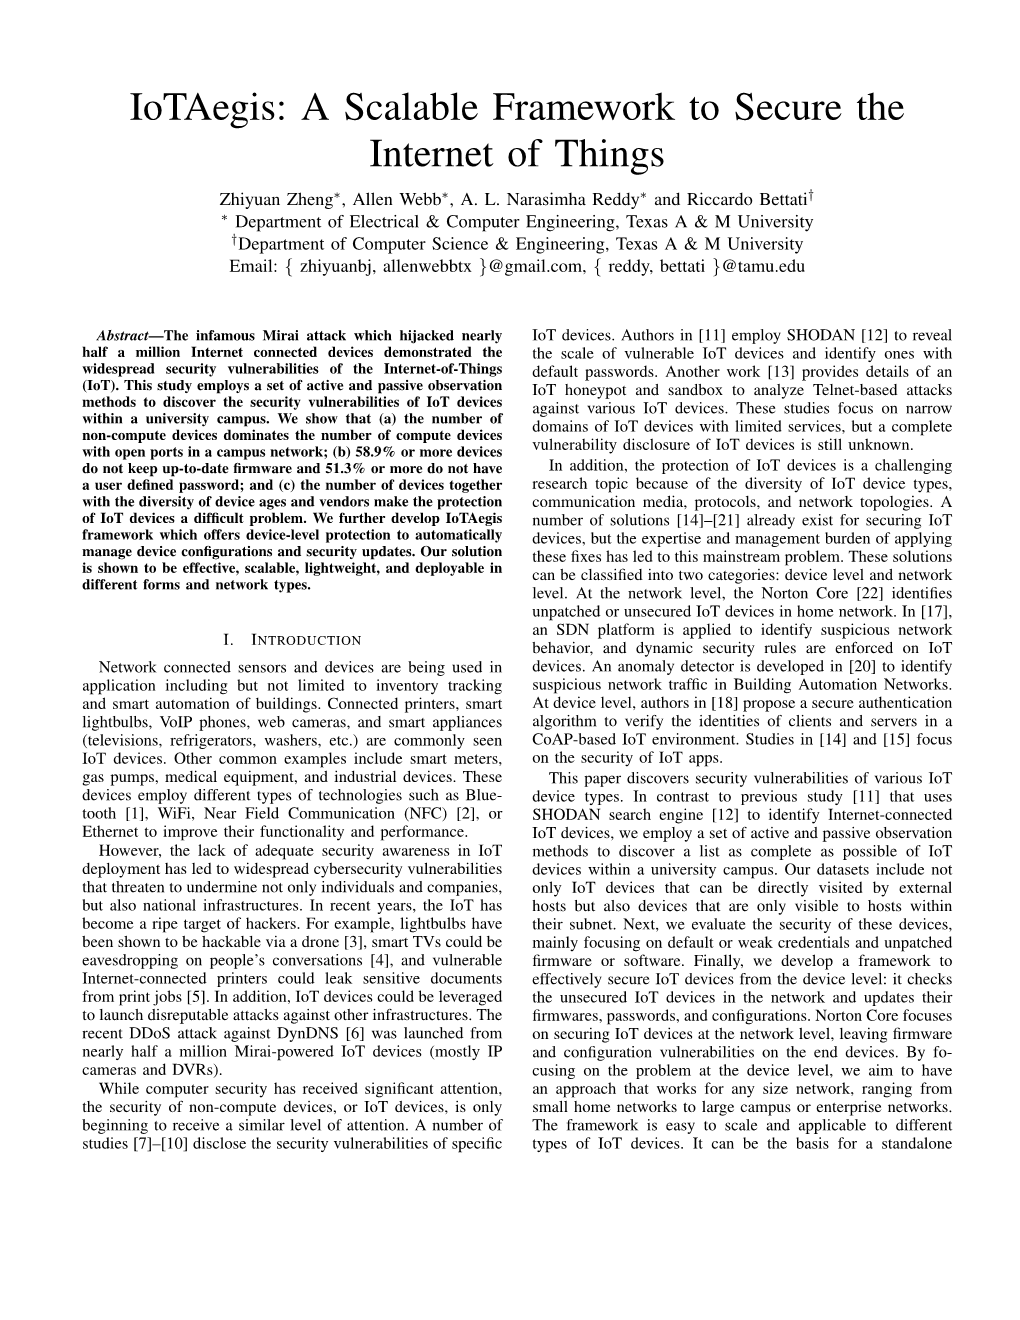 A Scalable Framework to Secure the Internet of Things Zhiyuan Zheng∗, Allen Webb∗, A